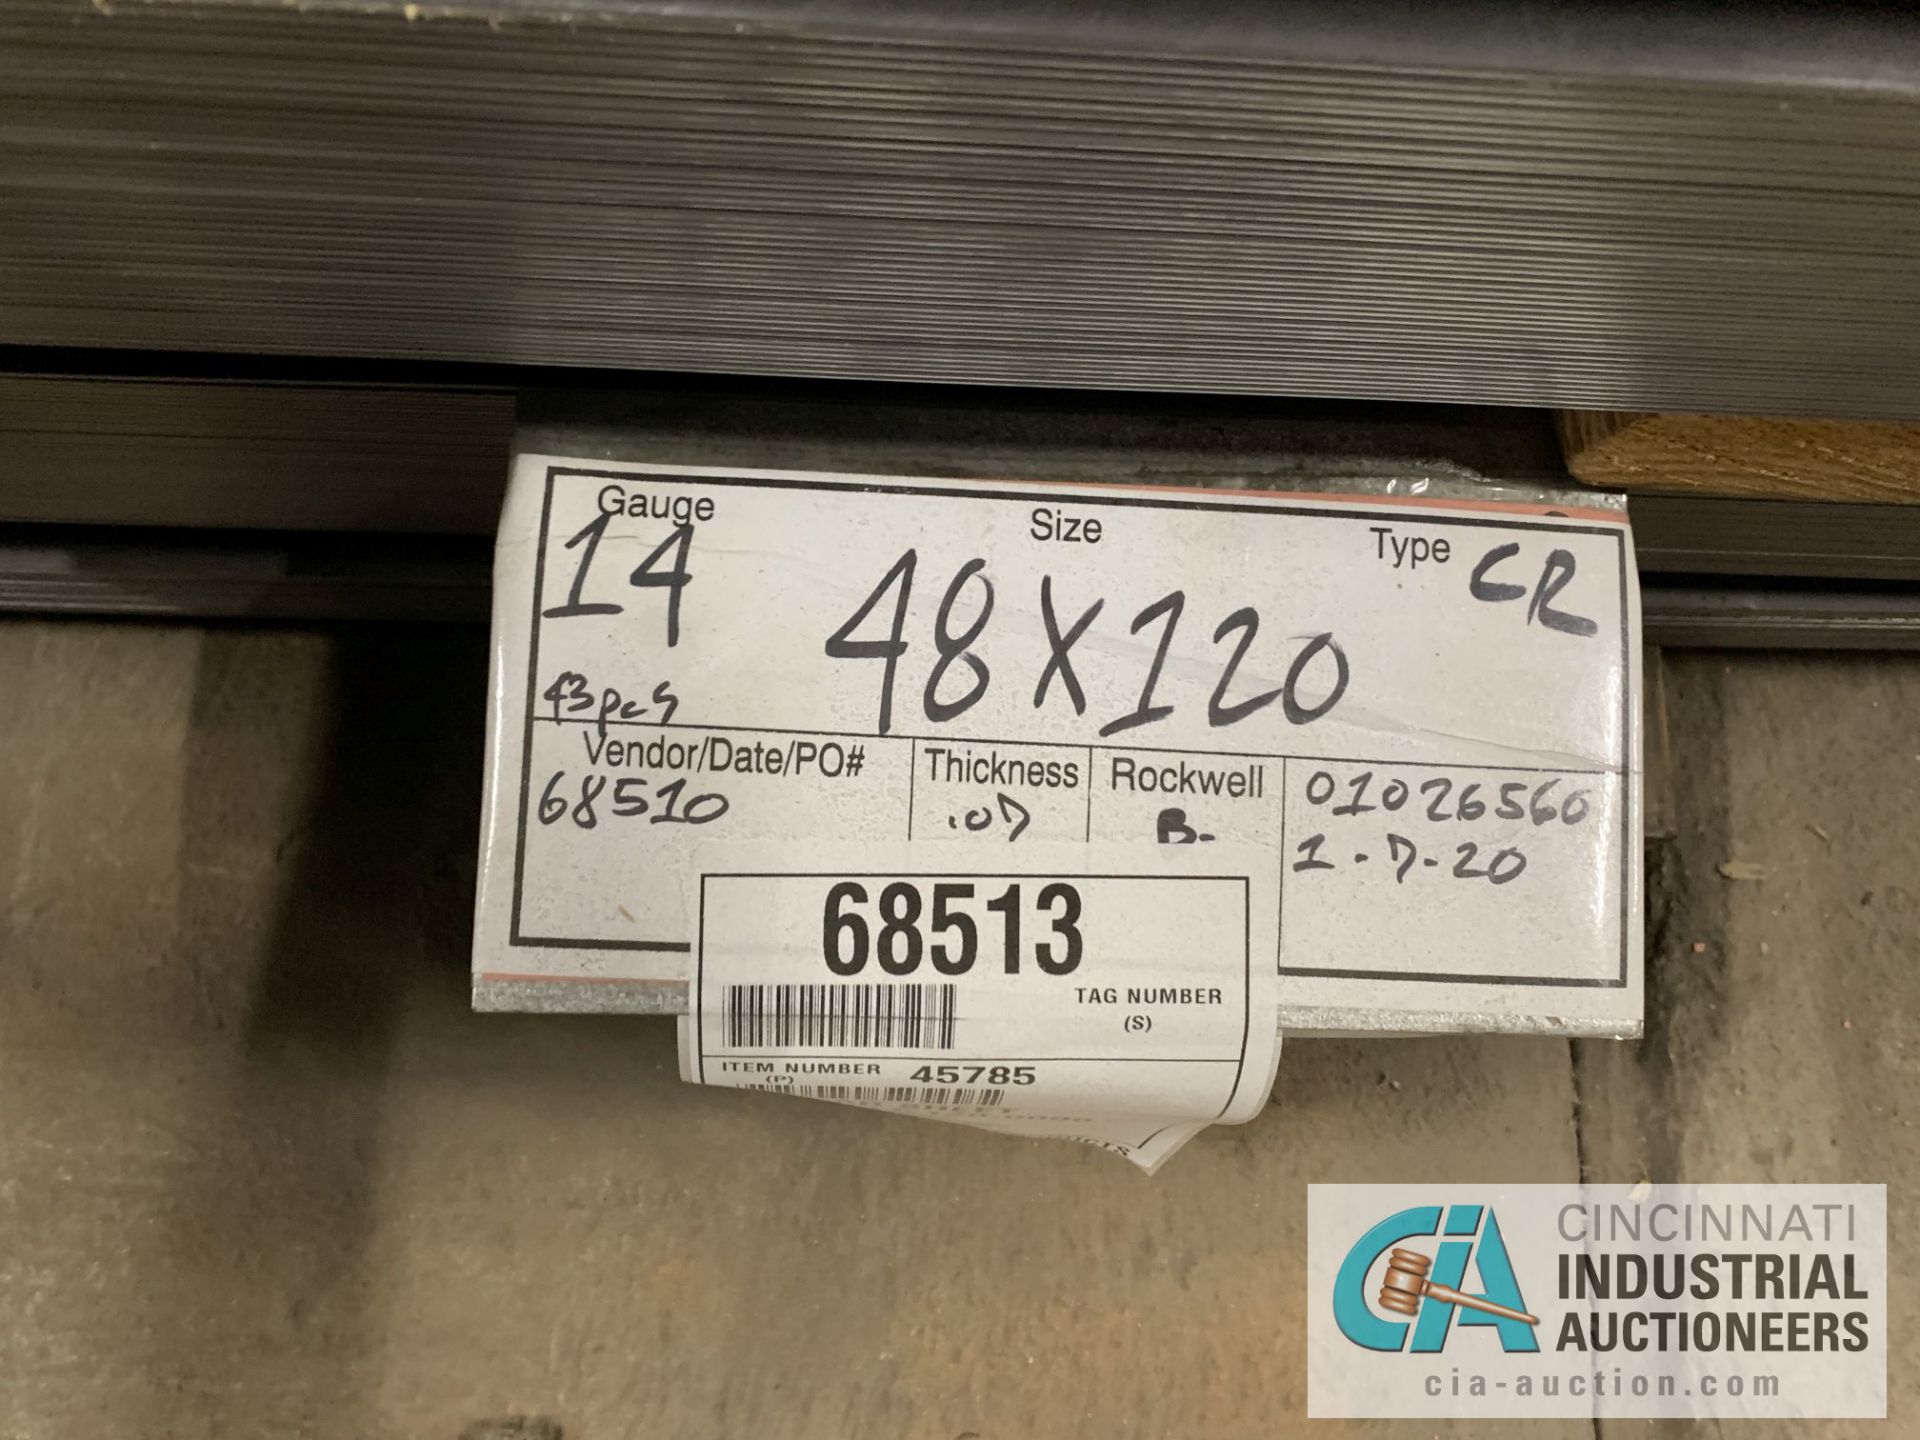 (LOT) APPROX. 19,125 LBS. UNCOATED SHEET STEEL, 1-STACK, 4-BUNDLES, SEE INVENTORY FOR LISTING. - Image 4 of 5